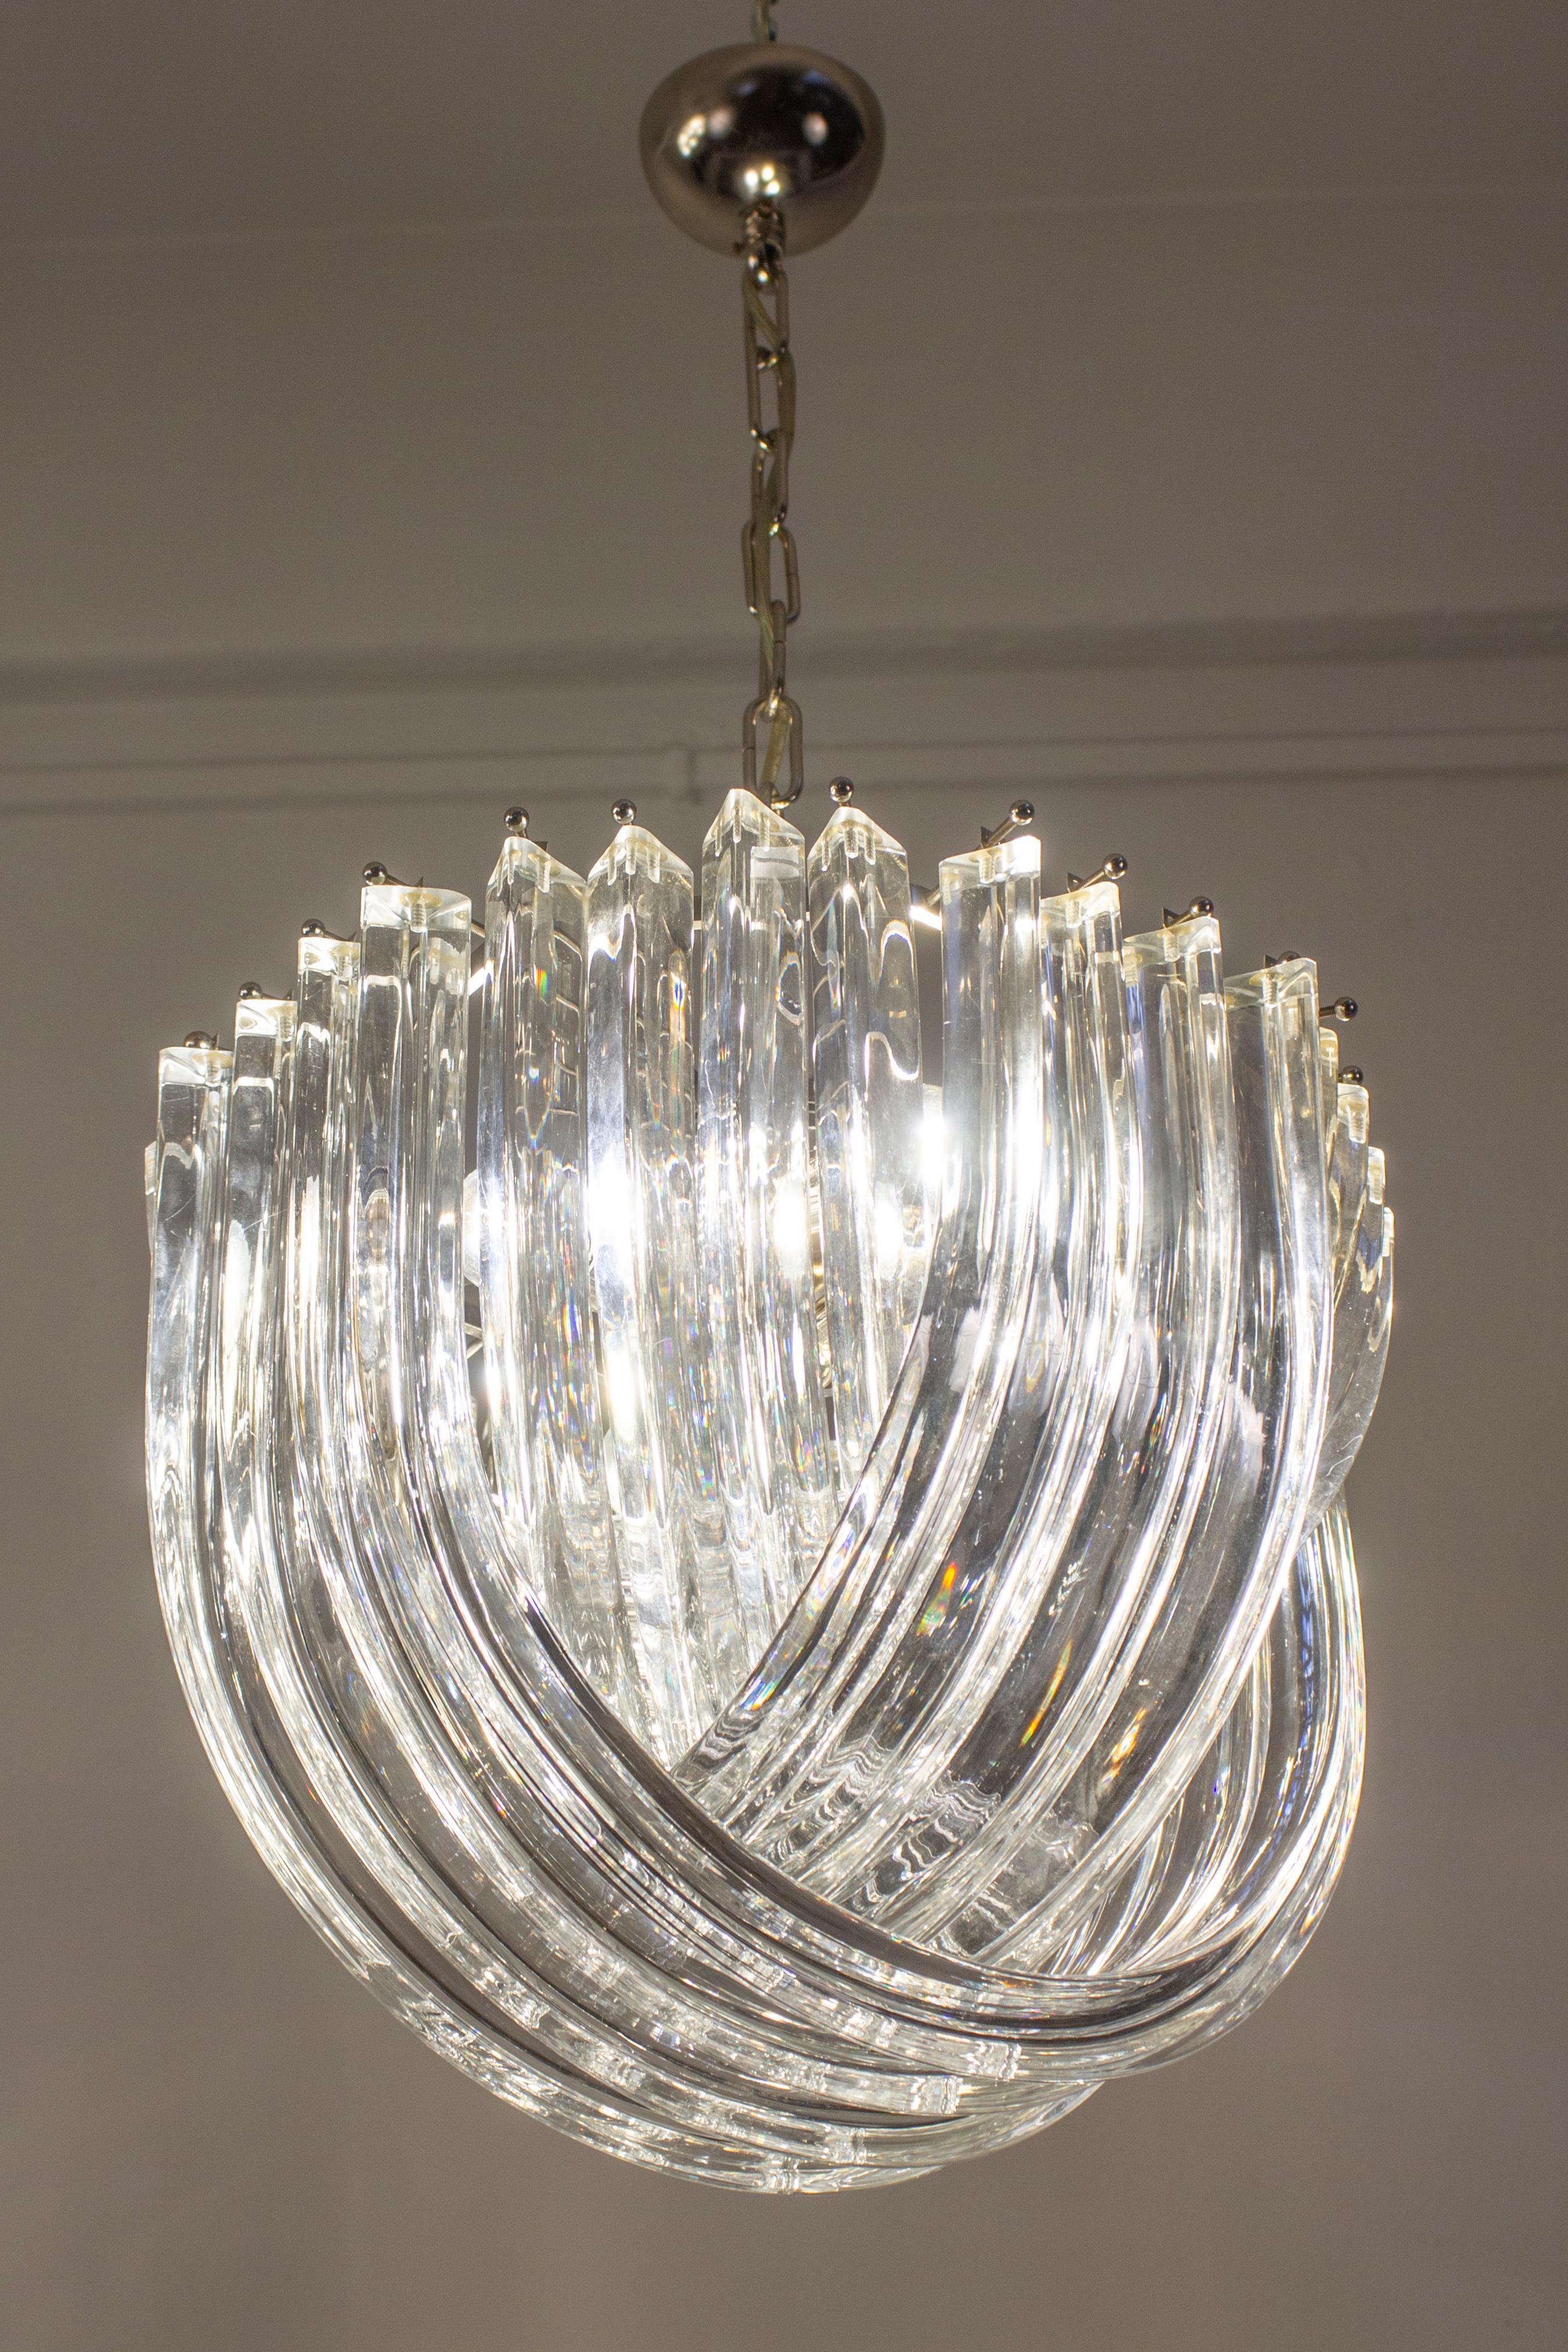 Amazing pair of glass chandelier or ceiling light with four layers of curving “triedri” glass prisms on a brass frame, designed by Carlo Nason for Venini, Italy.
A dynamic form, changing as you move around it, due to the overlapping levels of